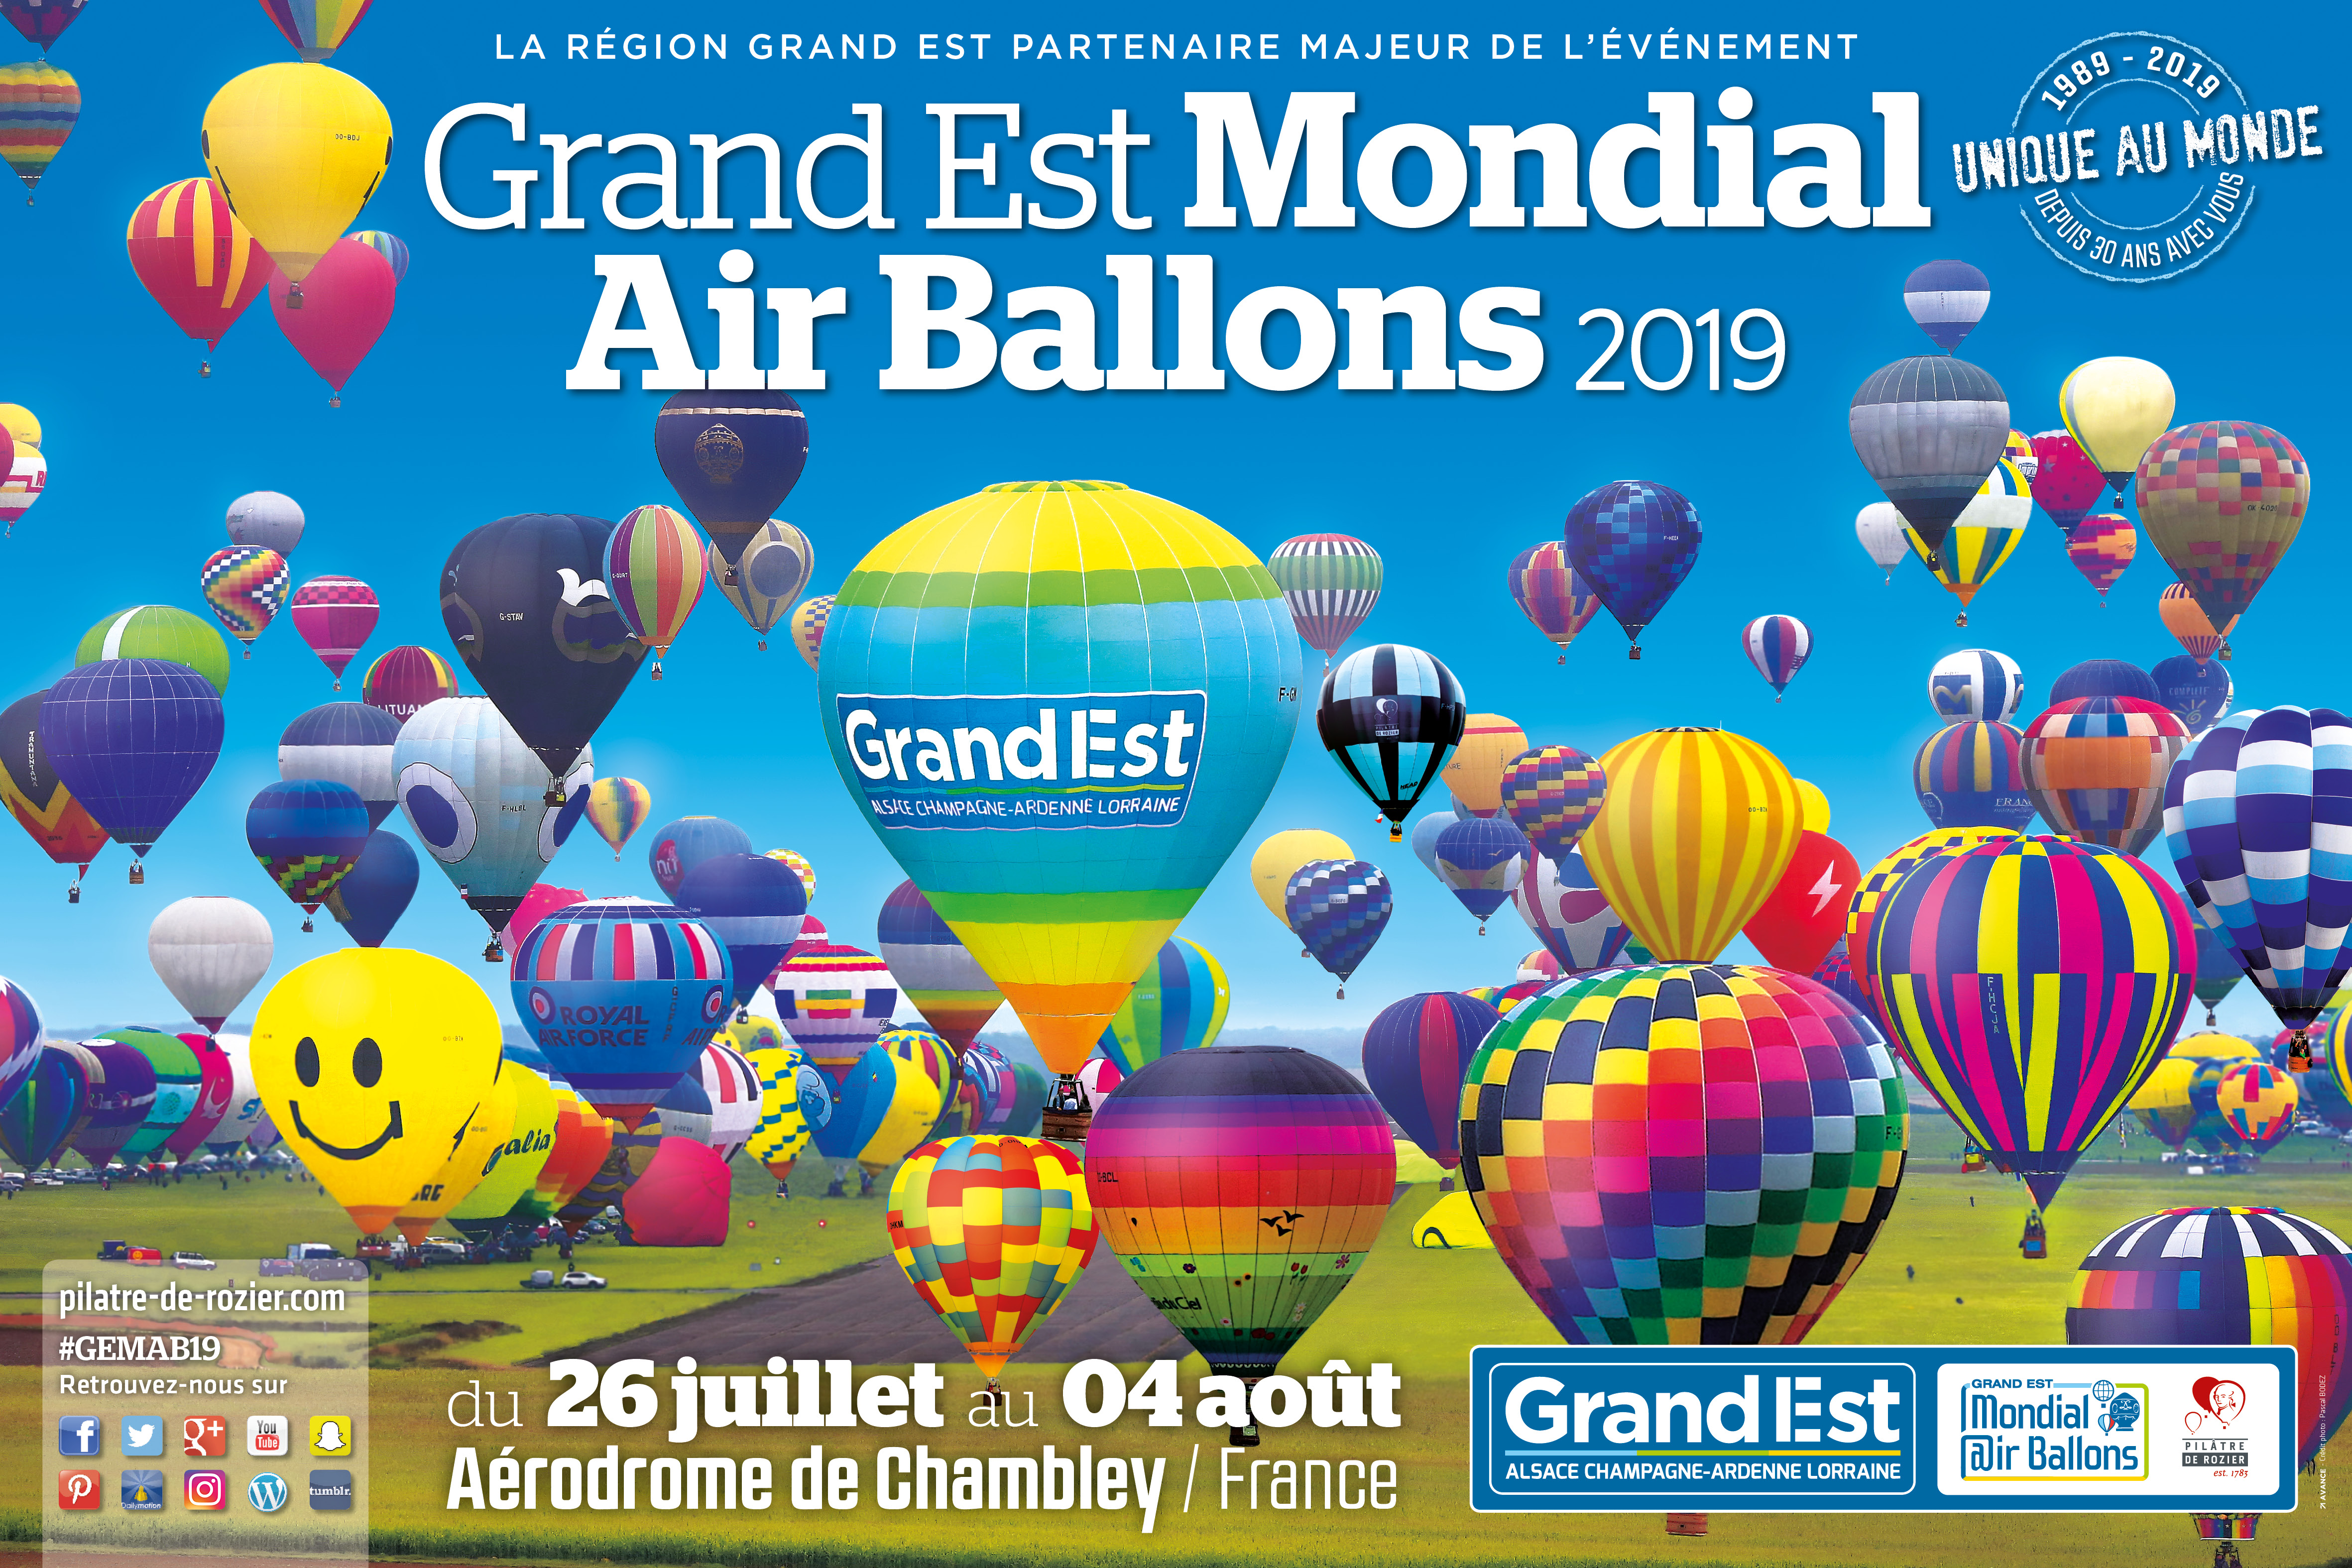 The magic of Grand Est Mondial Air Ballons® is back … Meeting during summer 2019! #GEMAB19